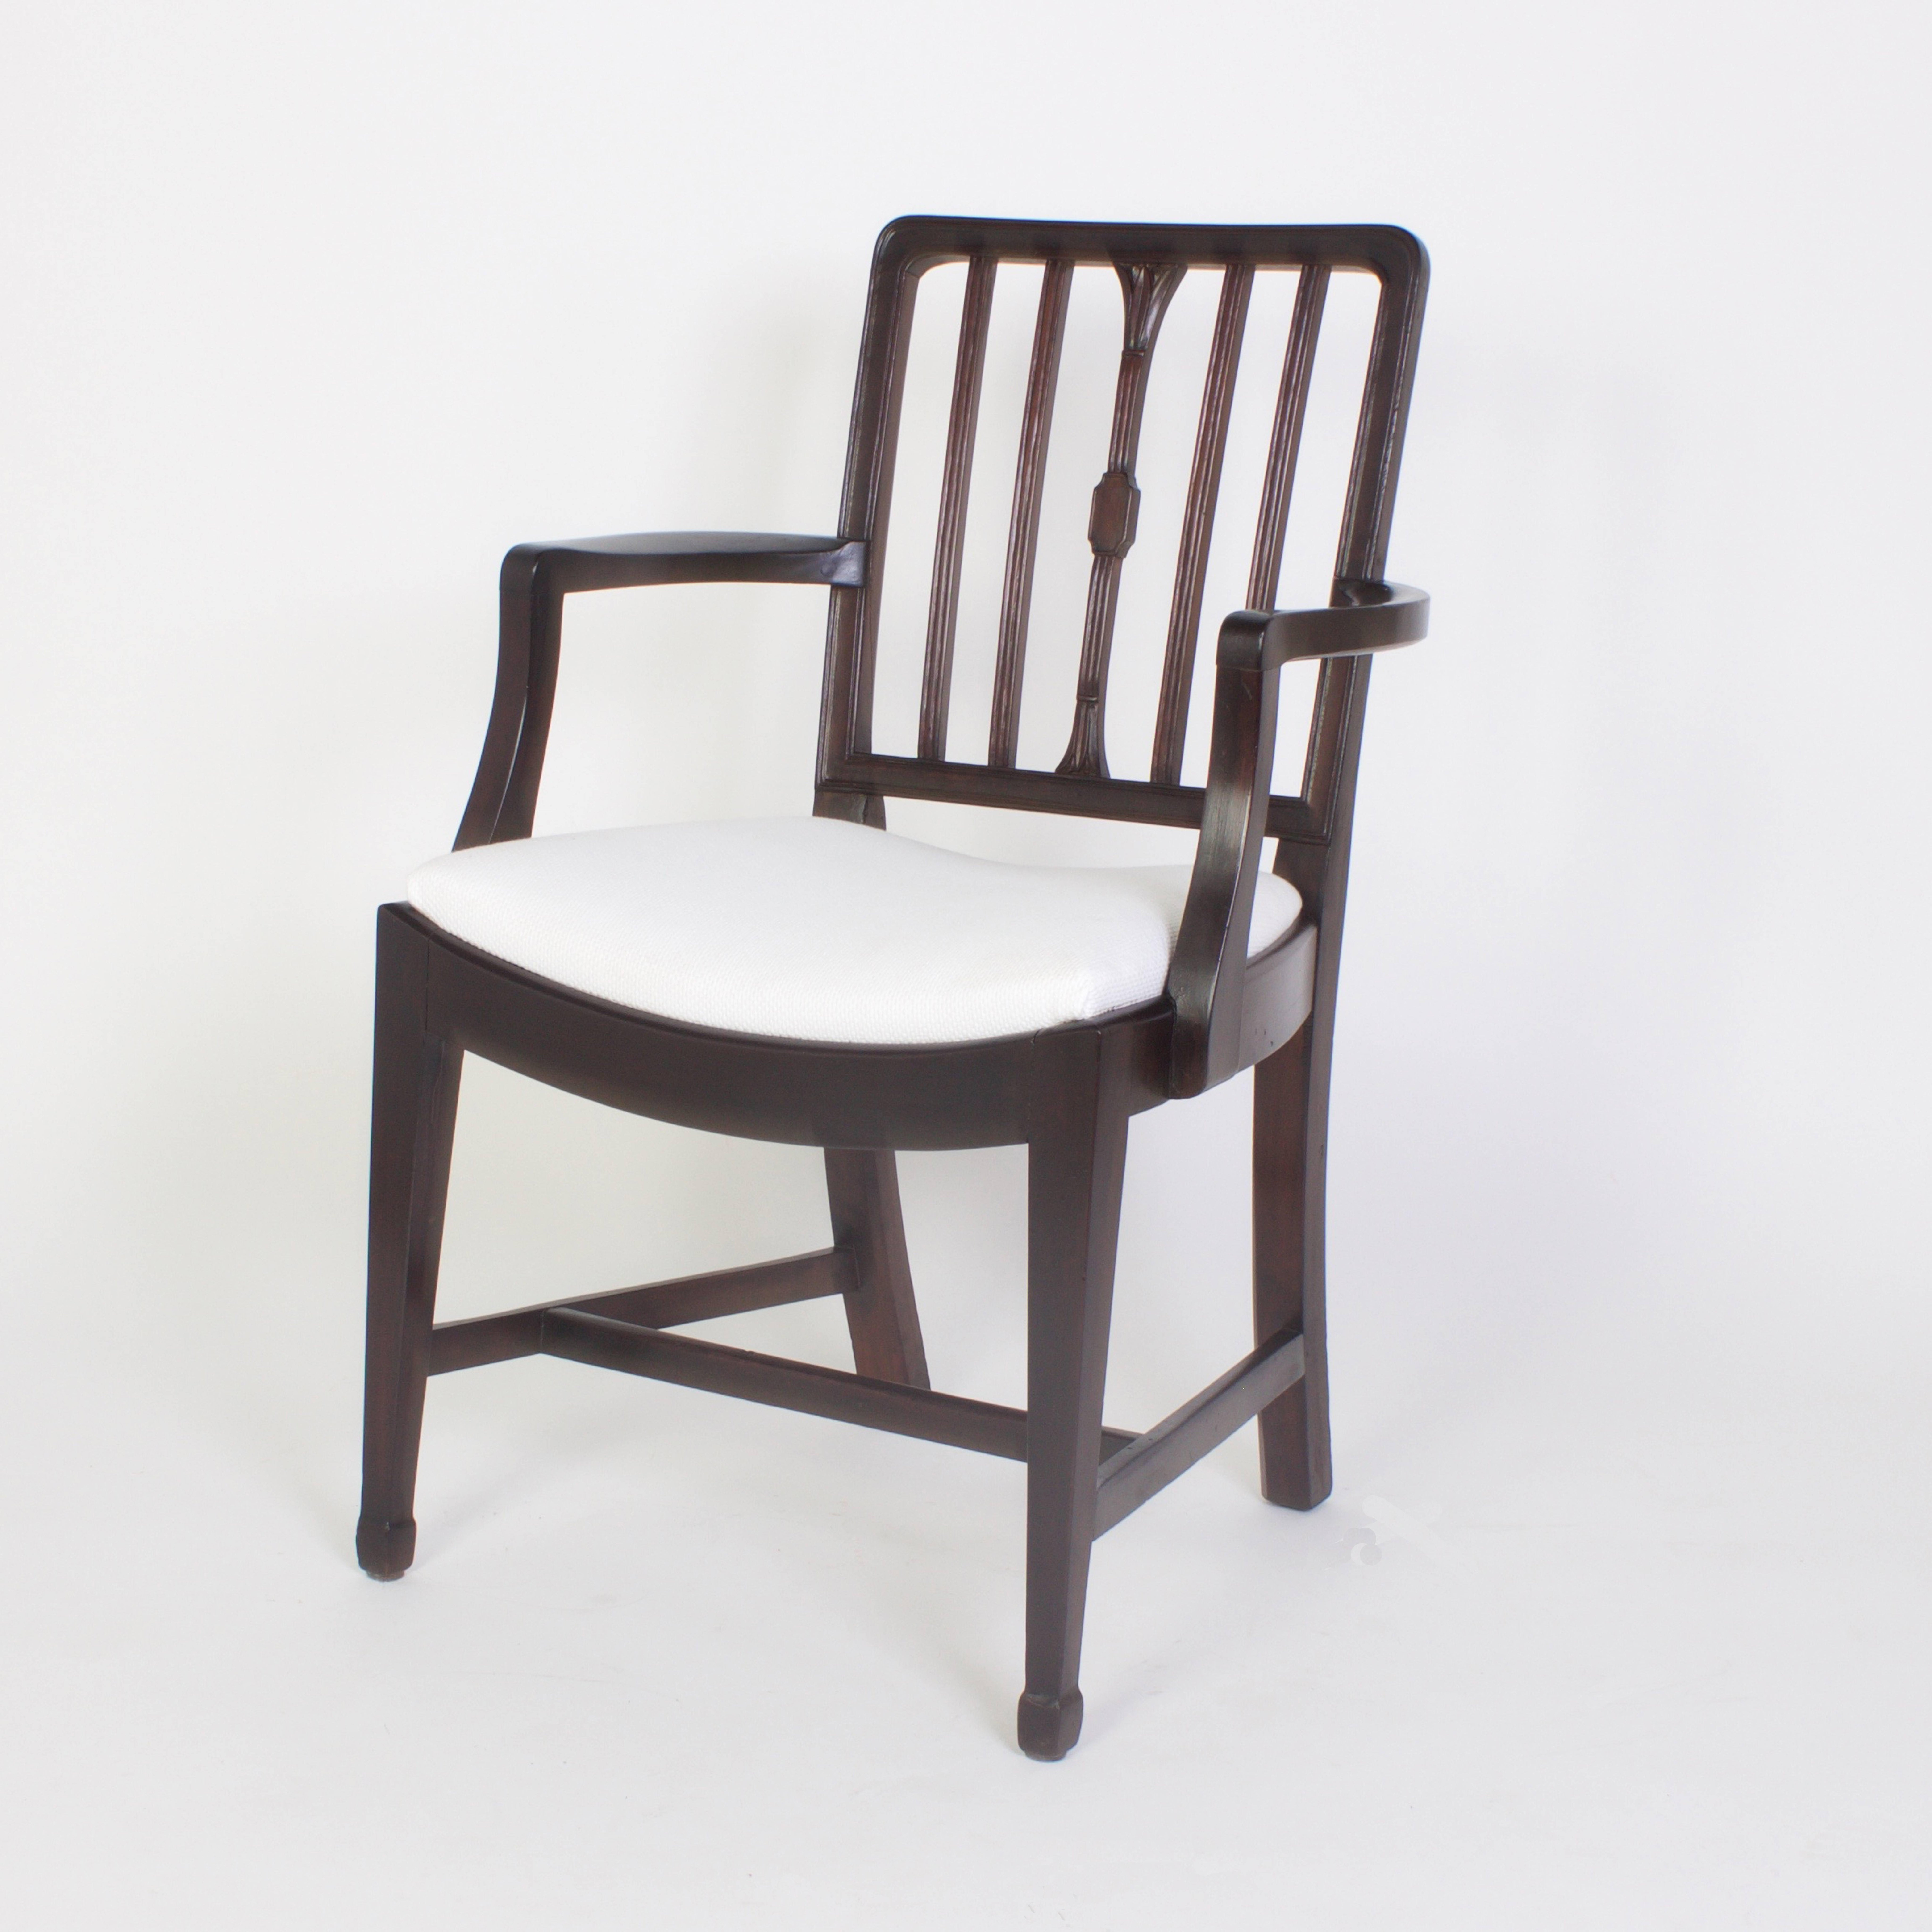 Hard to find set of 12 antique mahogany Georgian style dining chairs. Having ten side chairs and two armchairs all with carved acanthus and beaded back spokes, and desirable saddle seats, with slightly extended spade feet for modern height and a